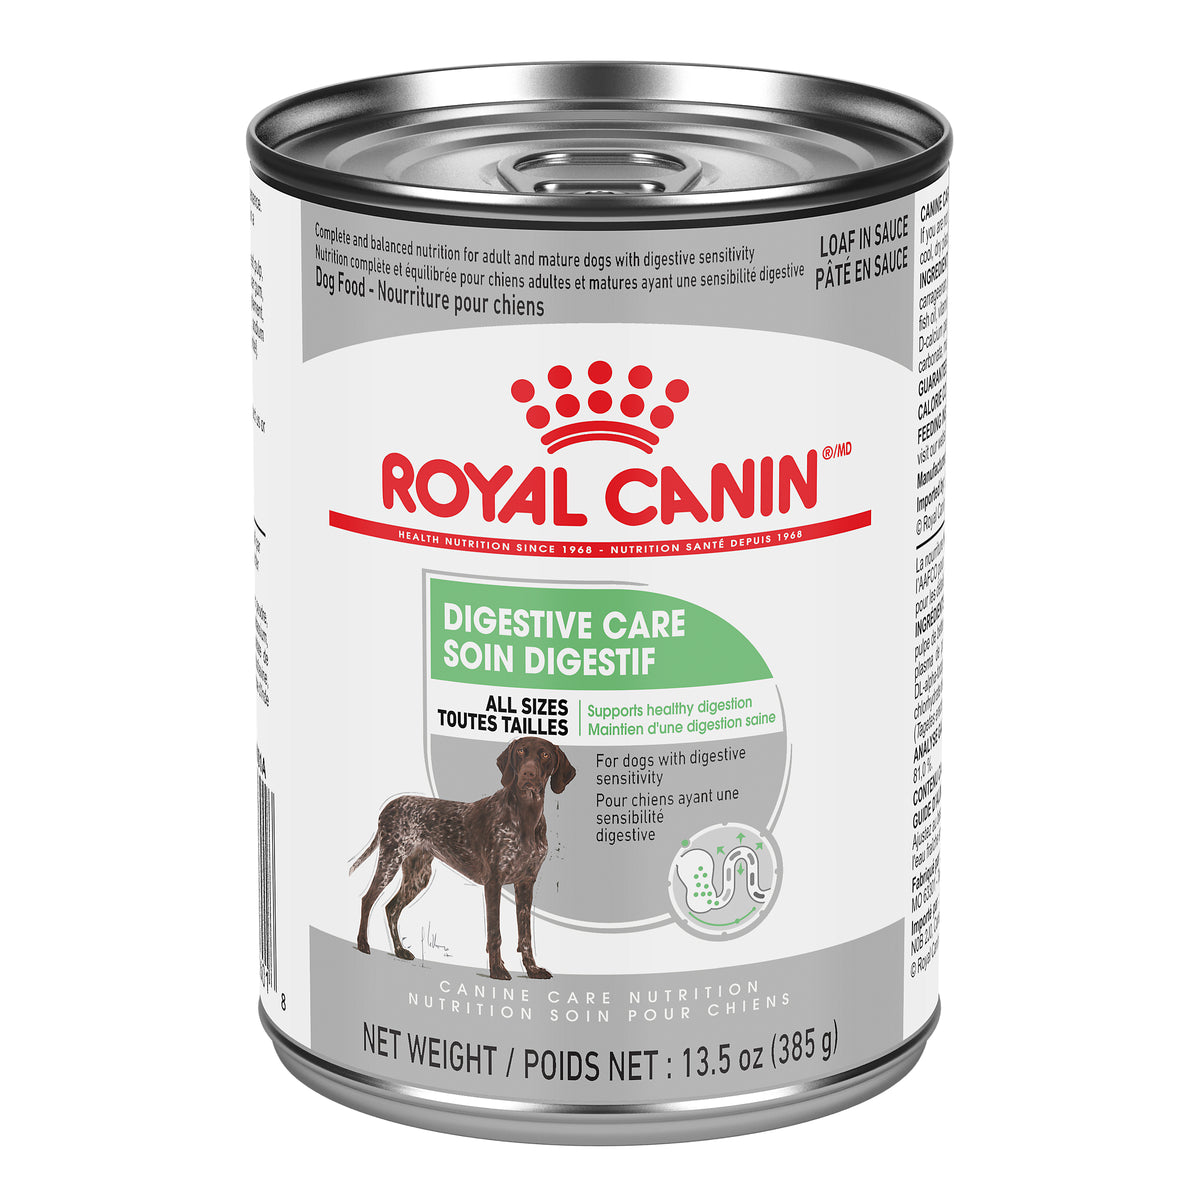 Royal Canin Canine Care Nutrition Digestive Care Loaf in Sauce Canned Dog Food (385g)